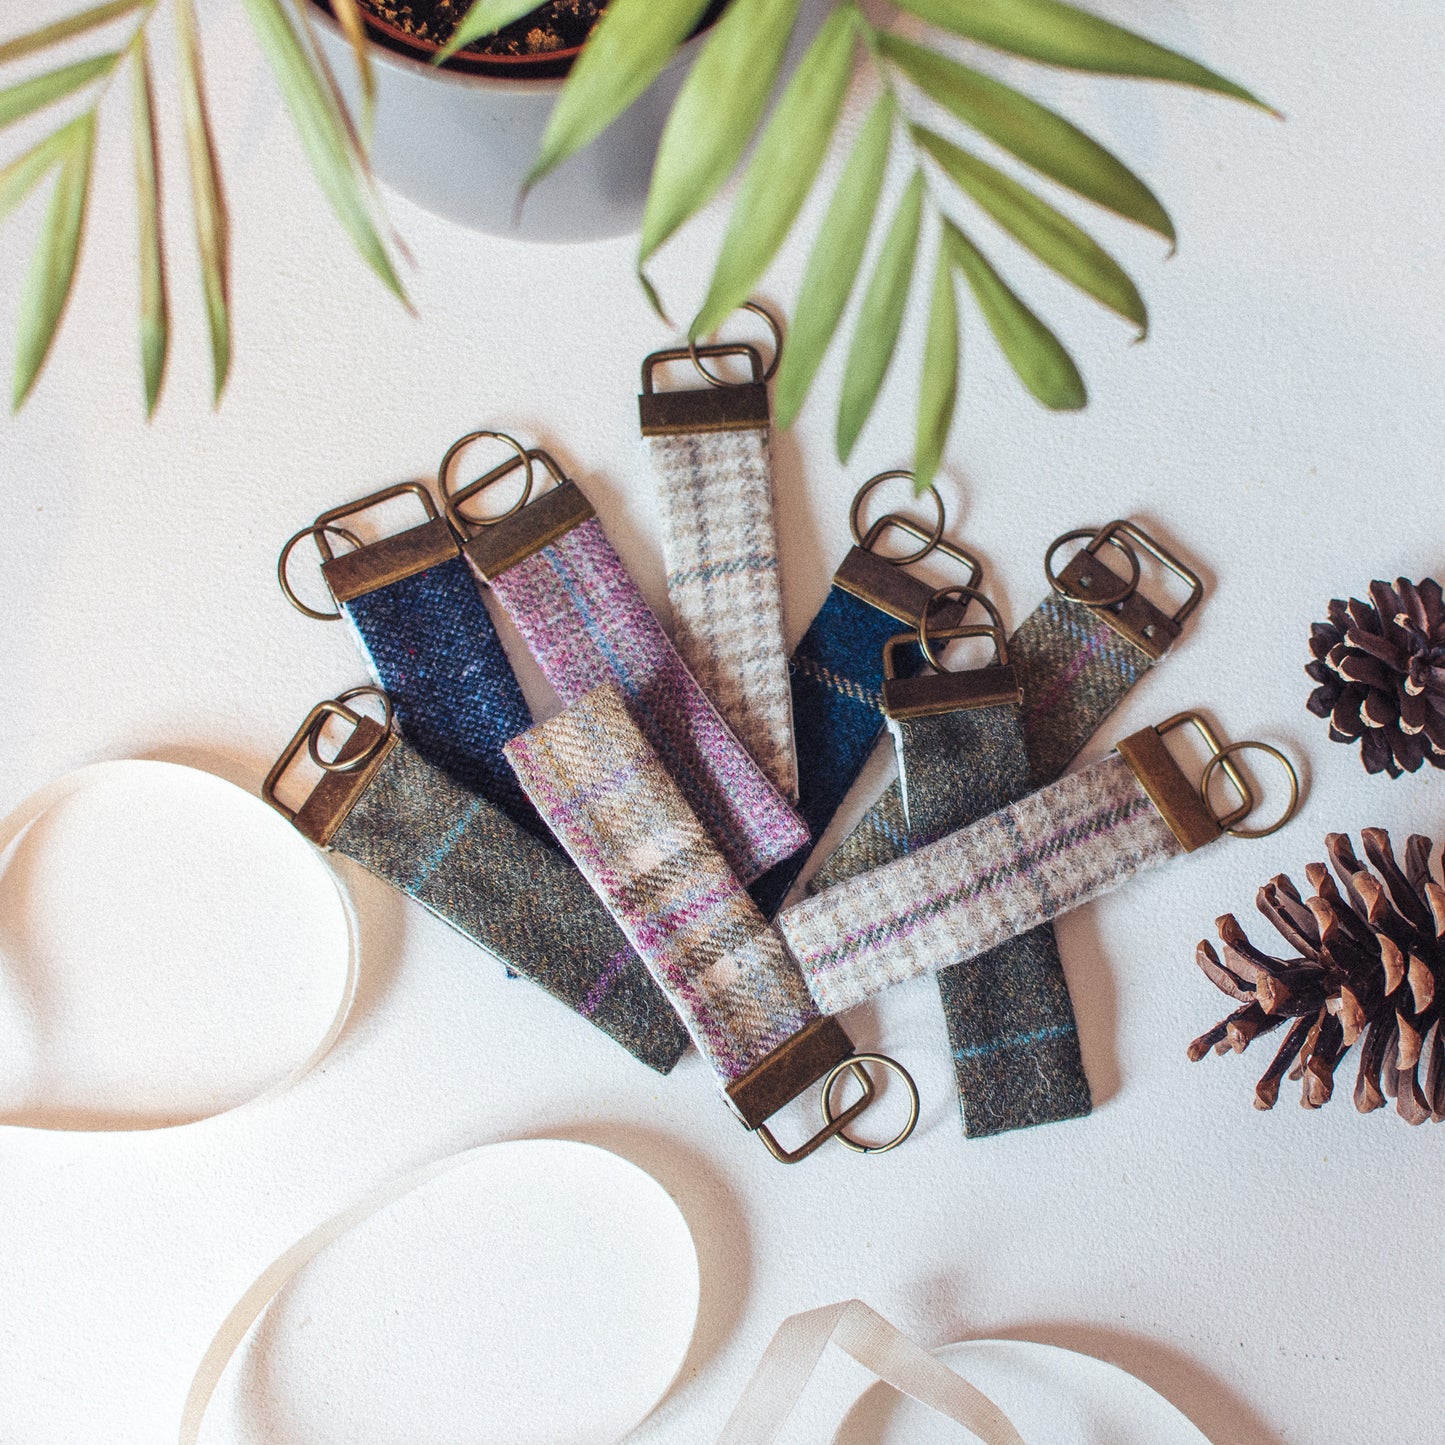 F&B Crafts - Tweed Keyrings - Handmade in Yorkshire  - Gift Ideas and Stocking Filler